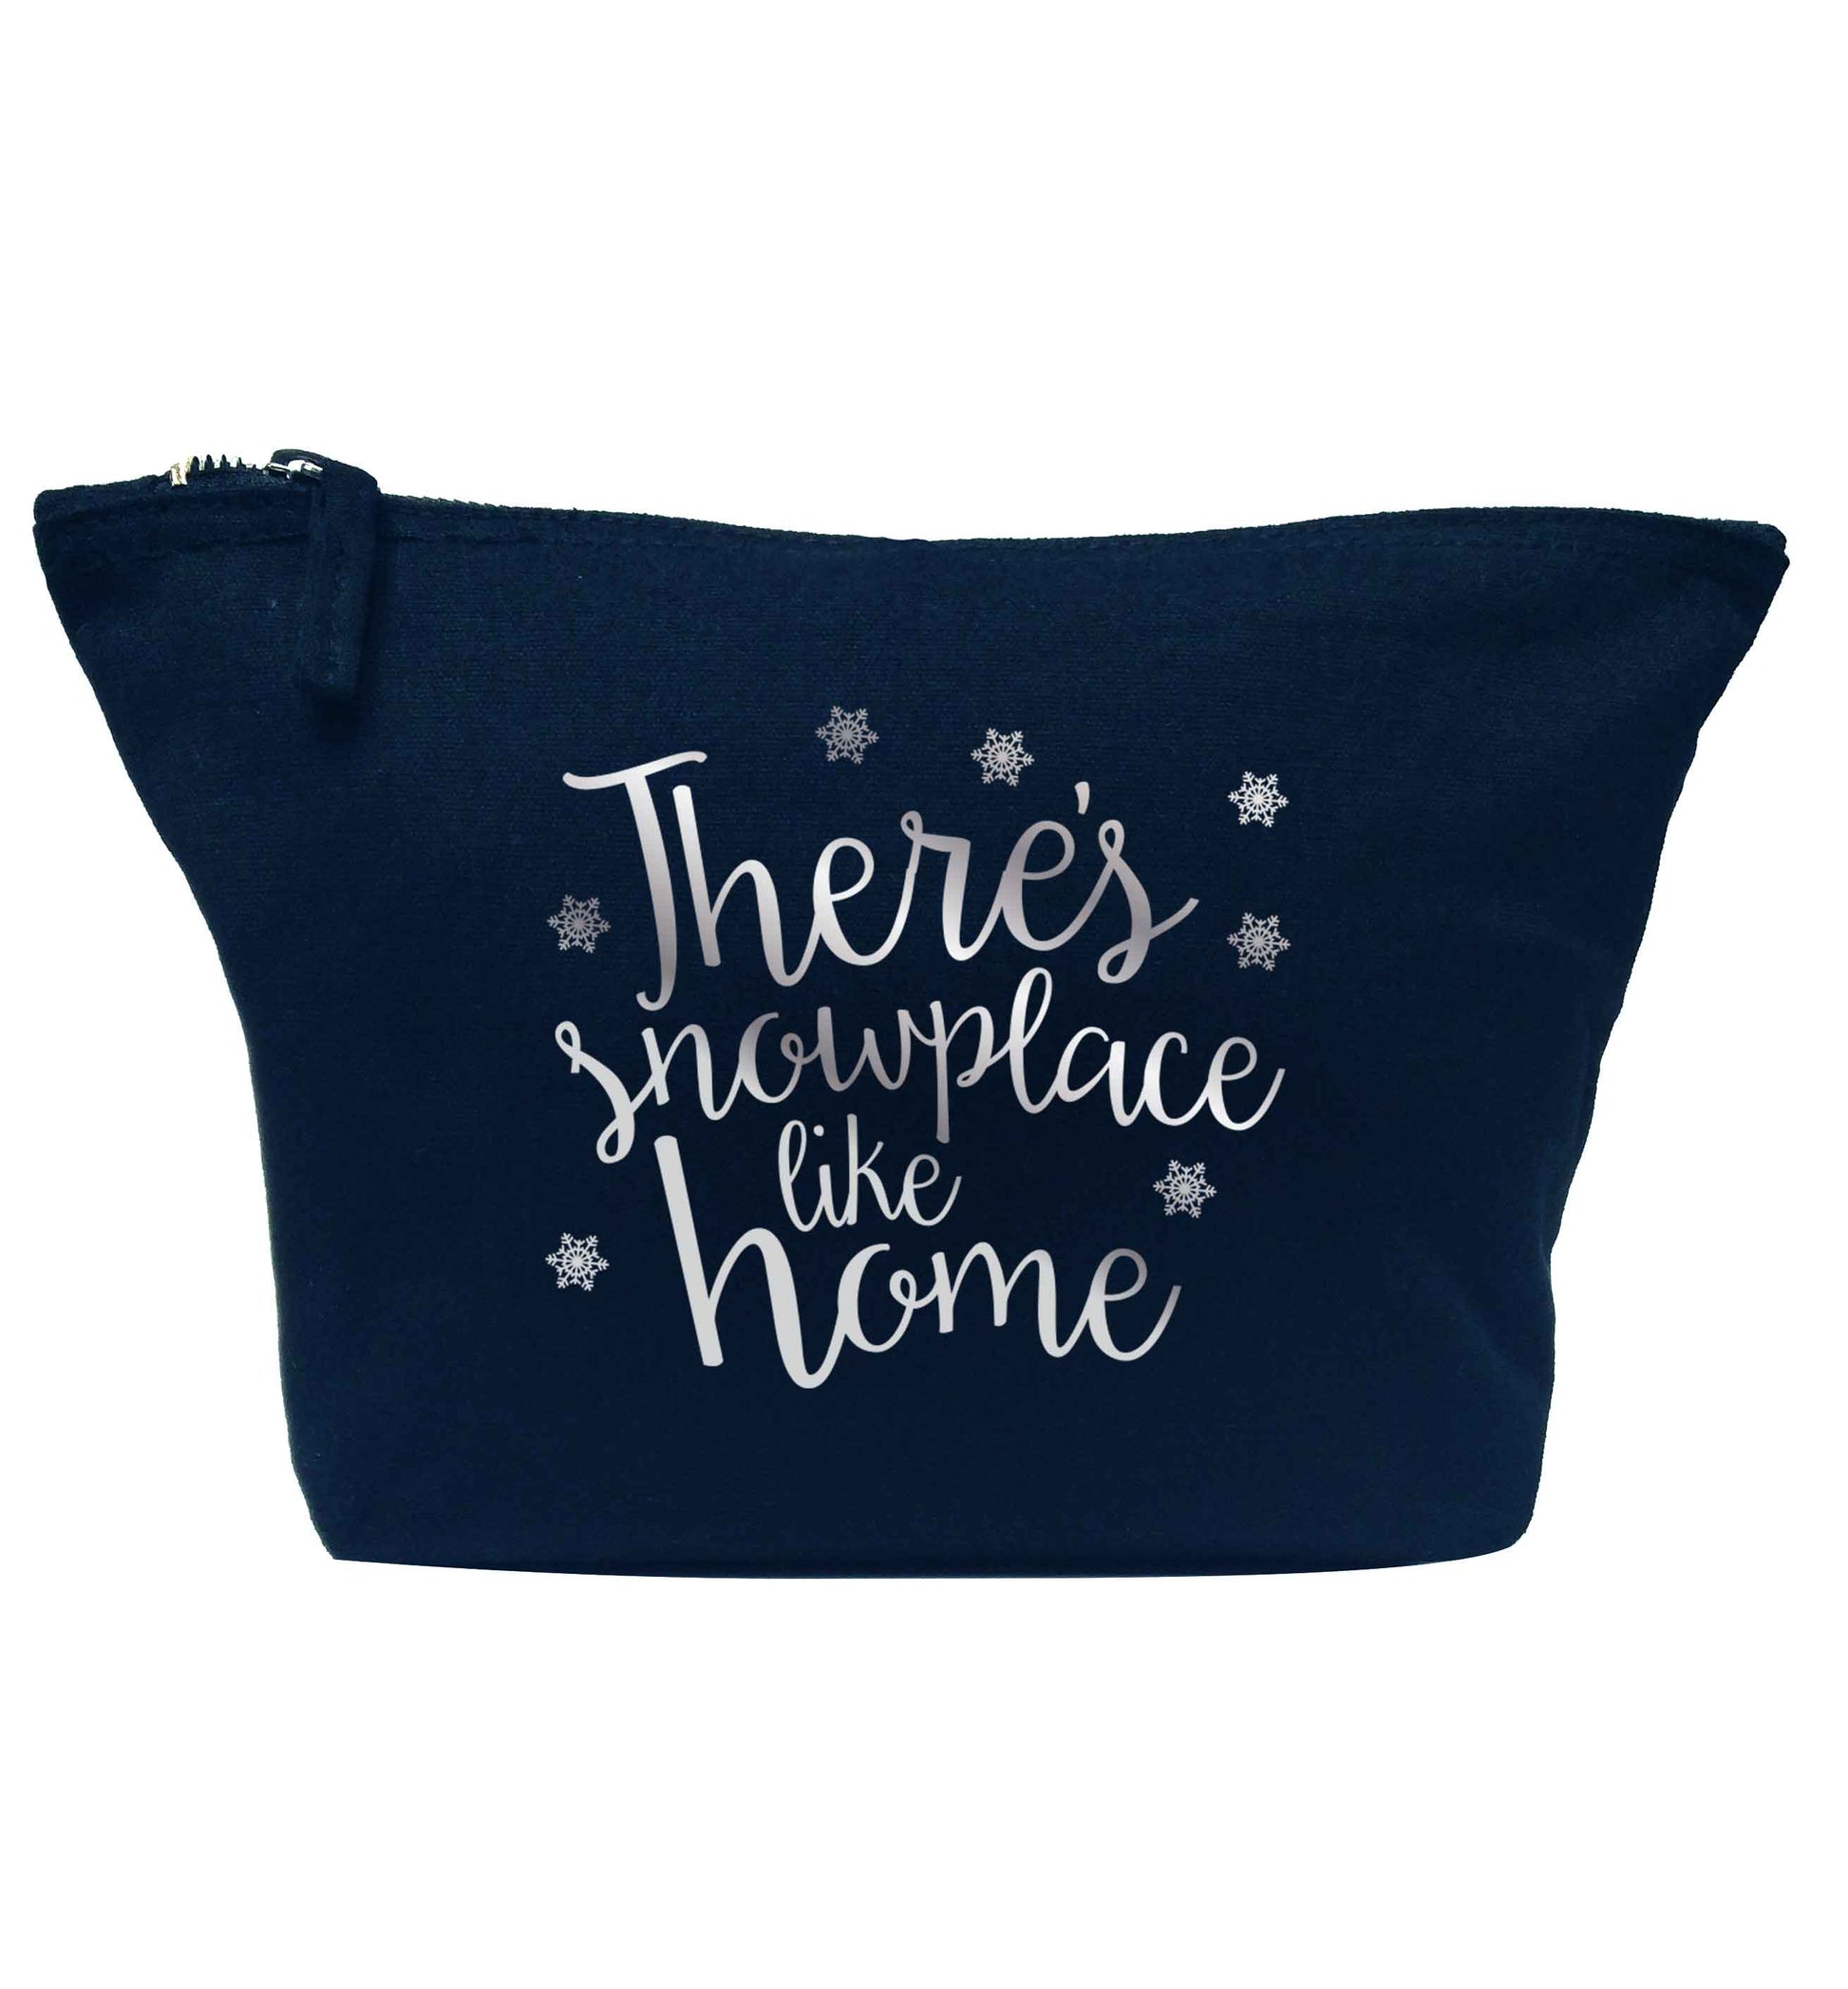 There's snowplace like home - metallic silver navy makeup bag